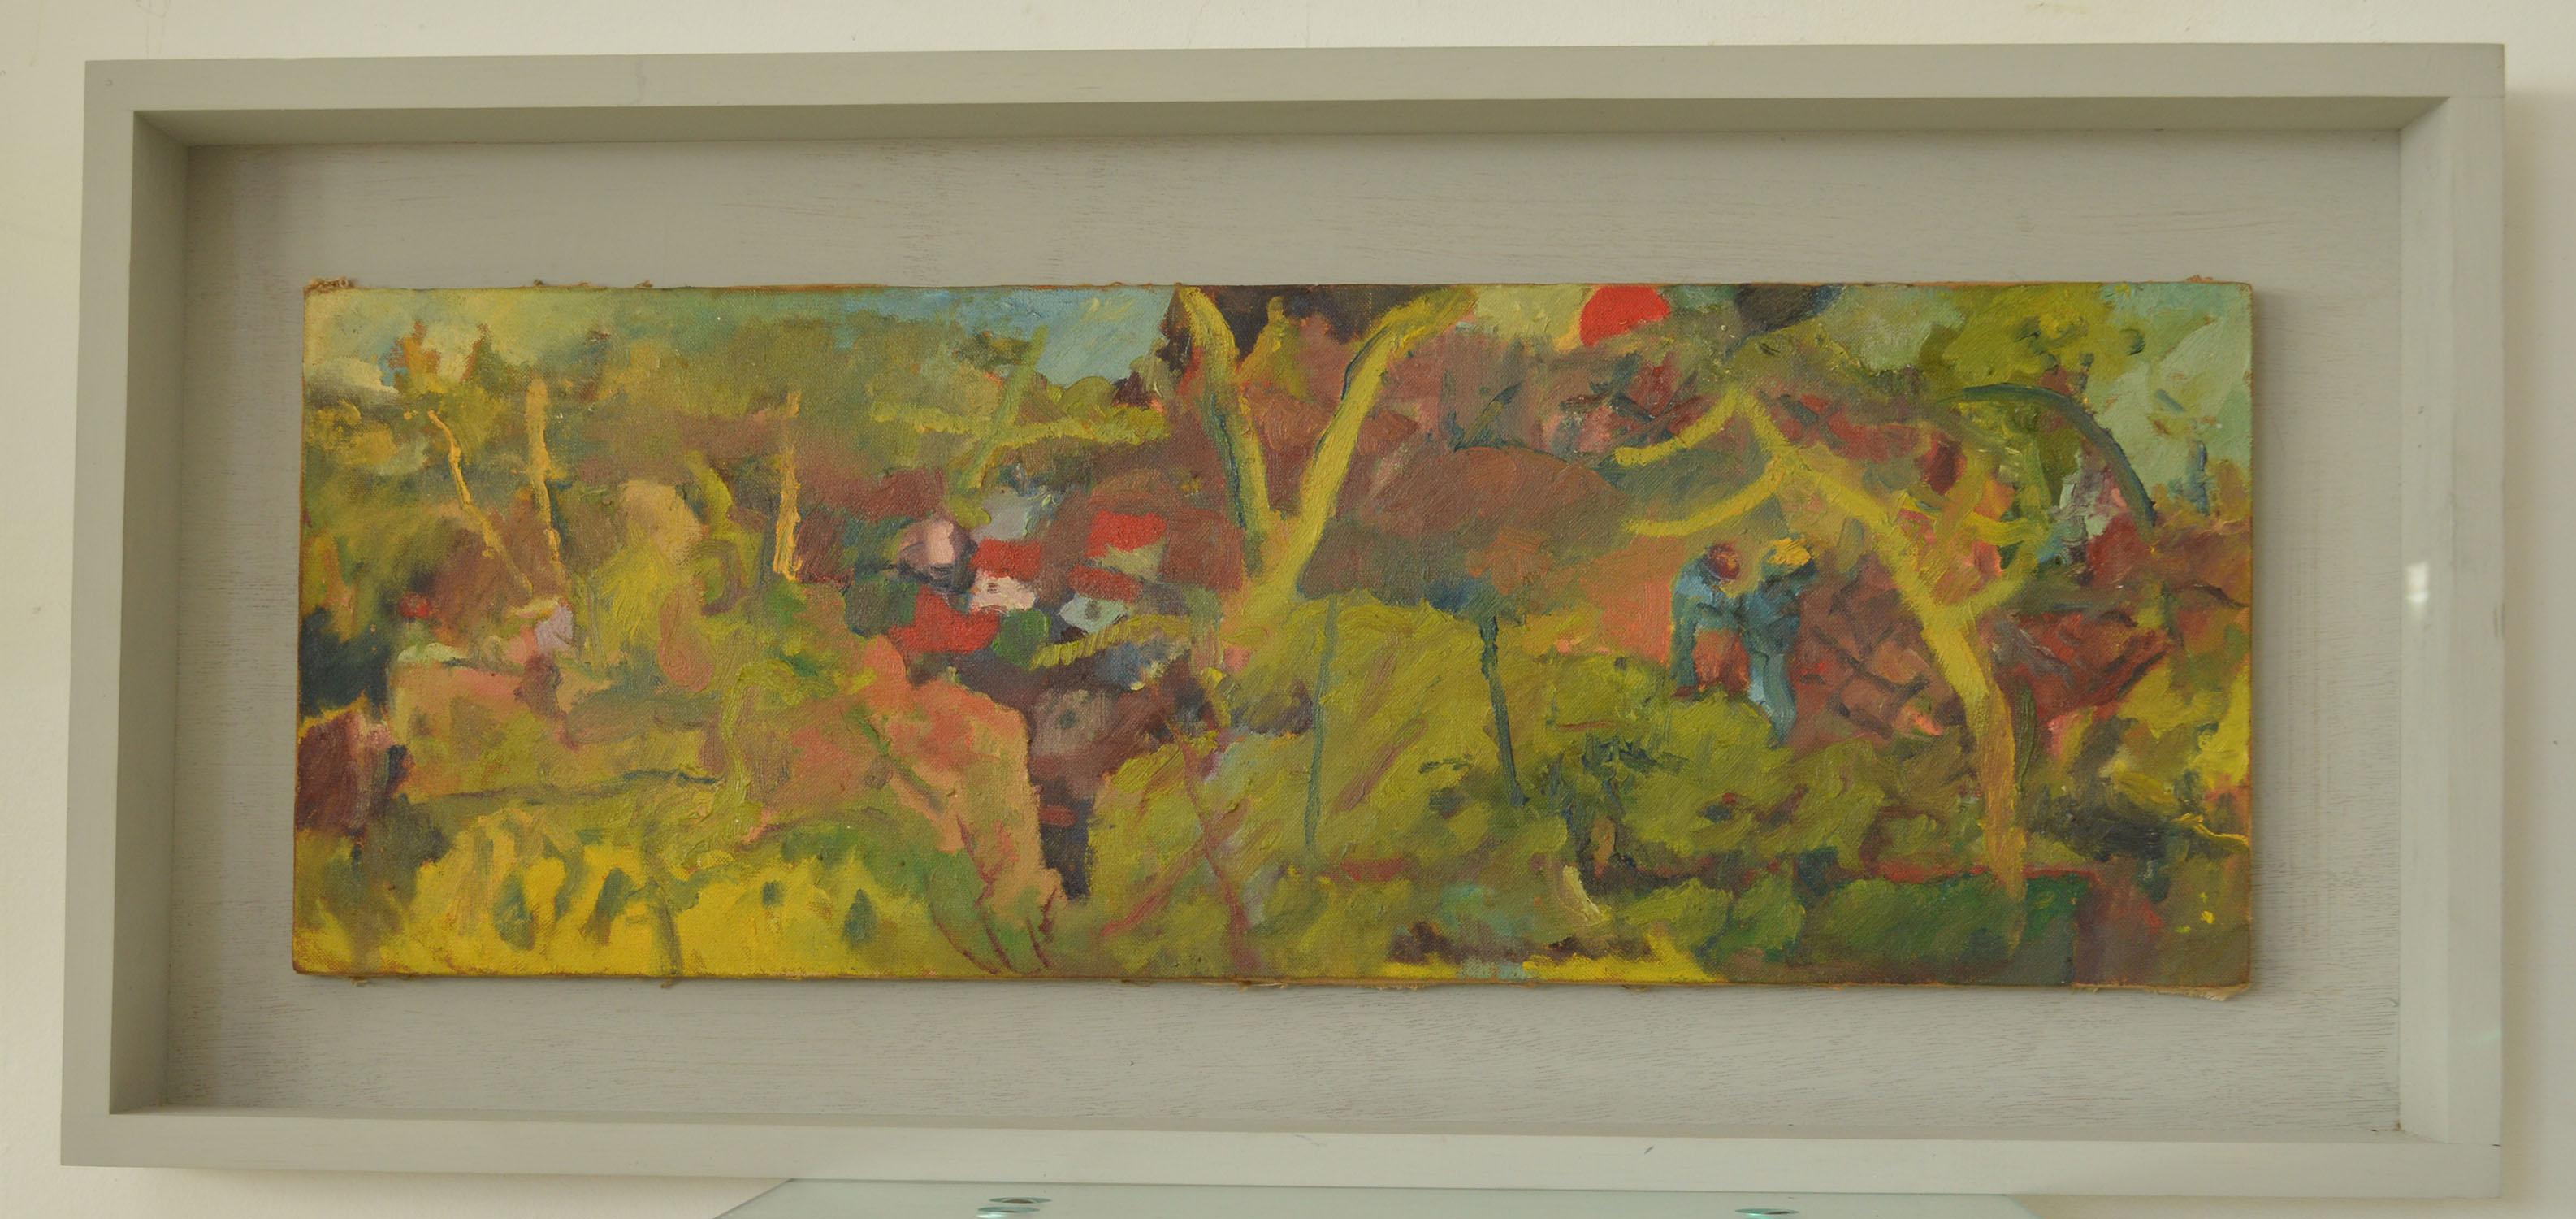 Painted Figures in a Landscape, Tony Phillips, 1975